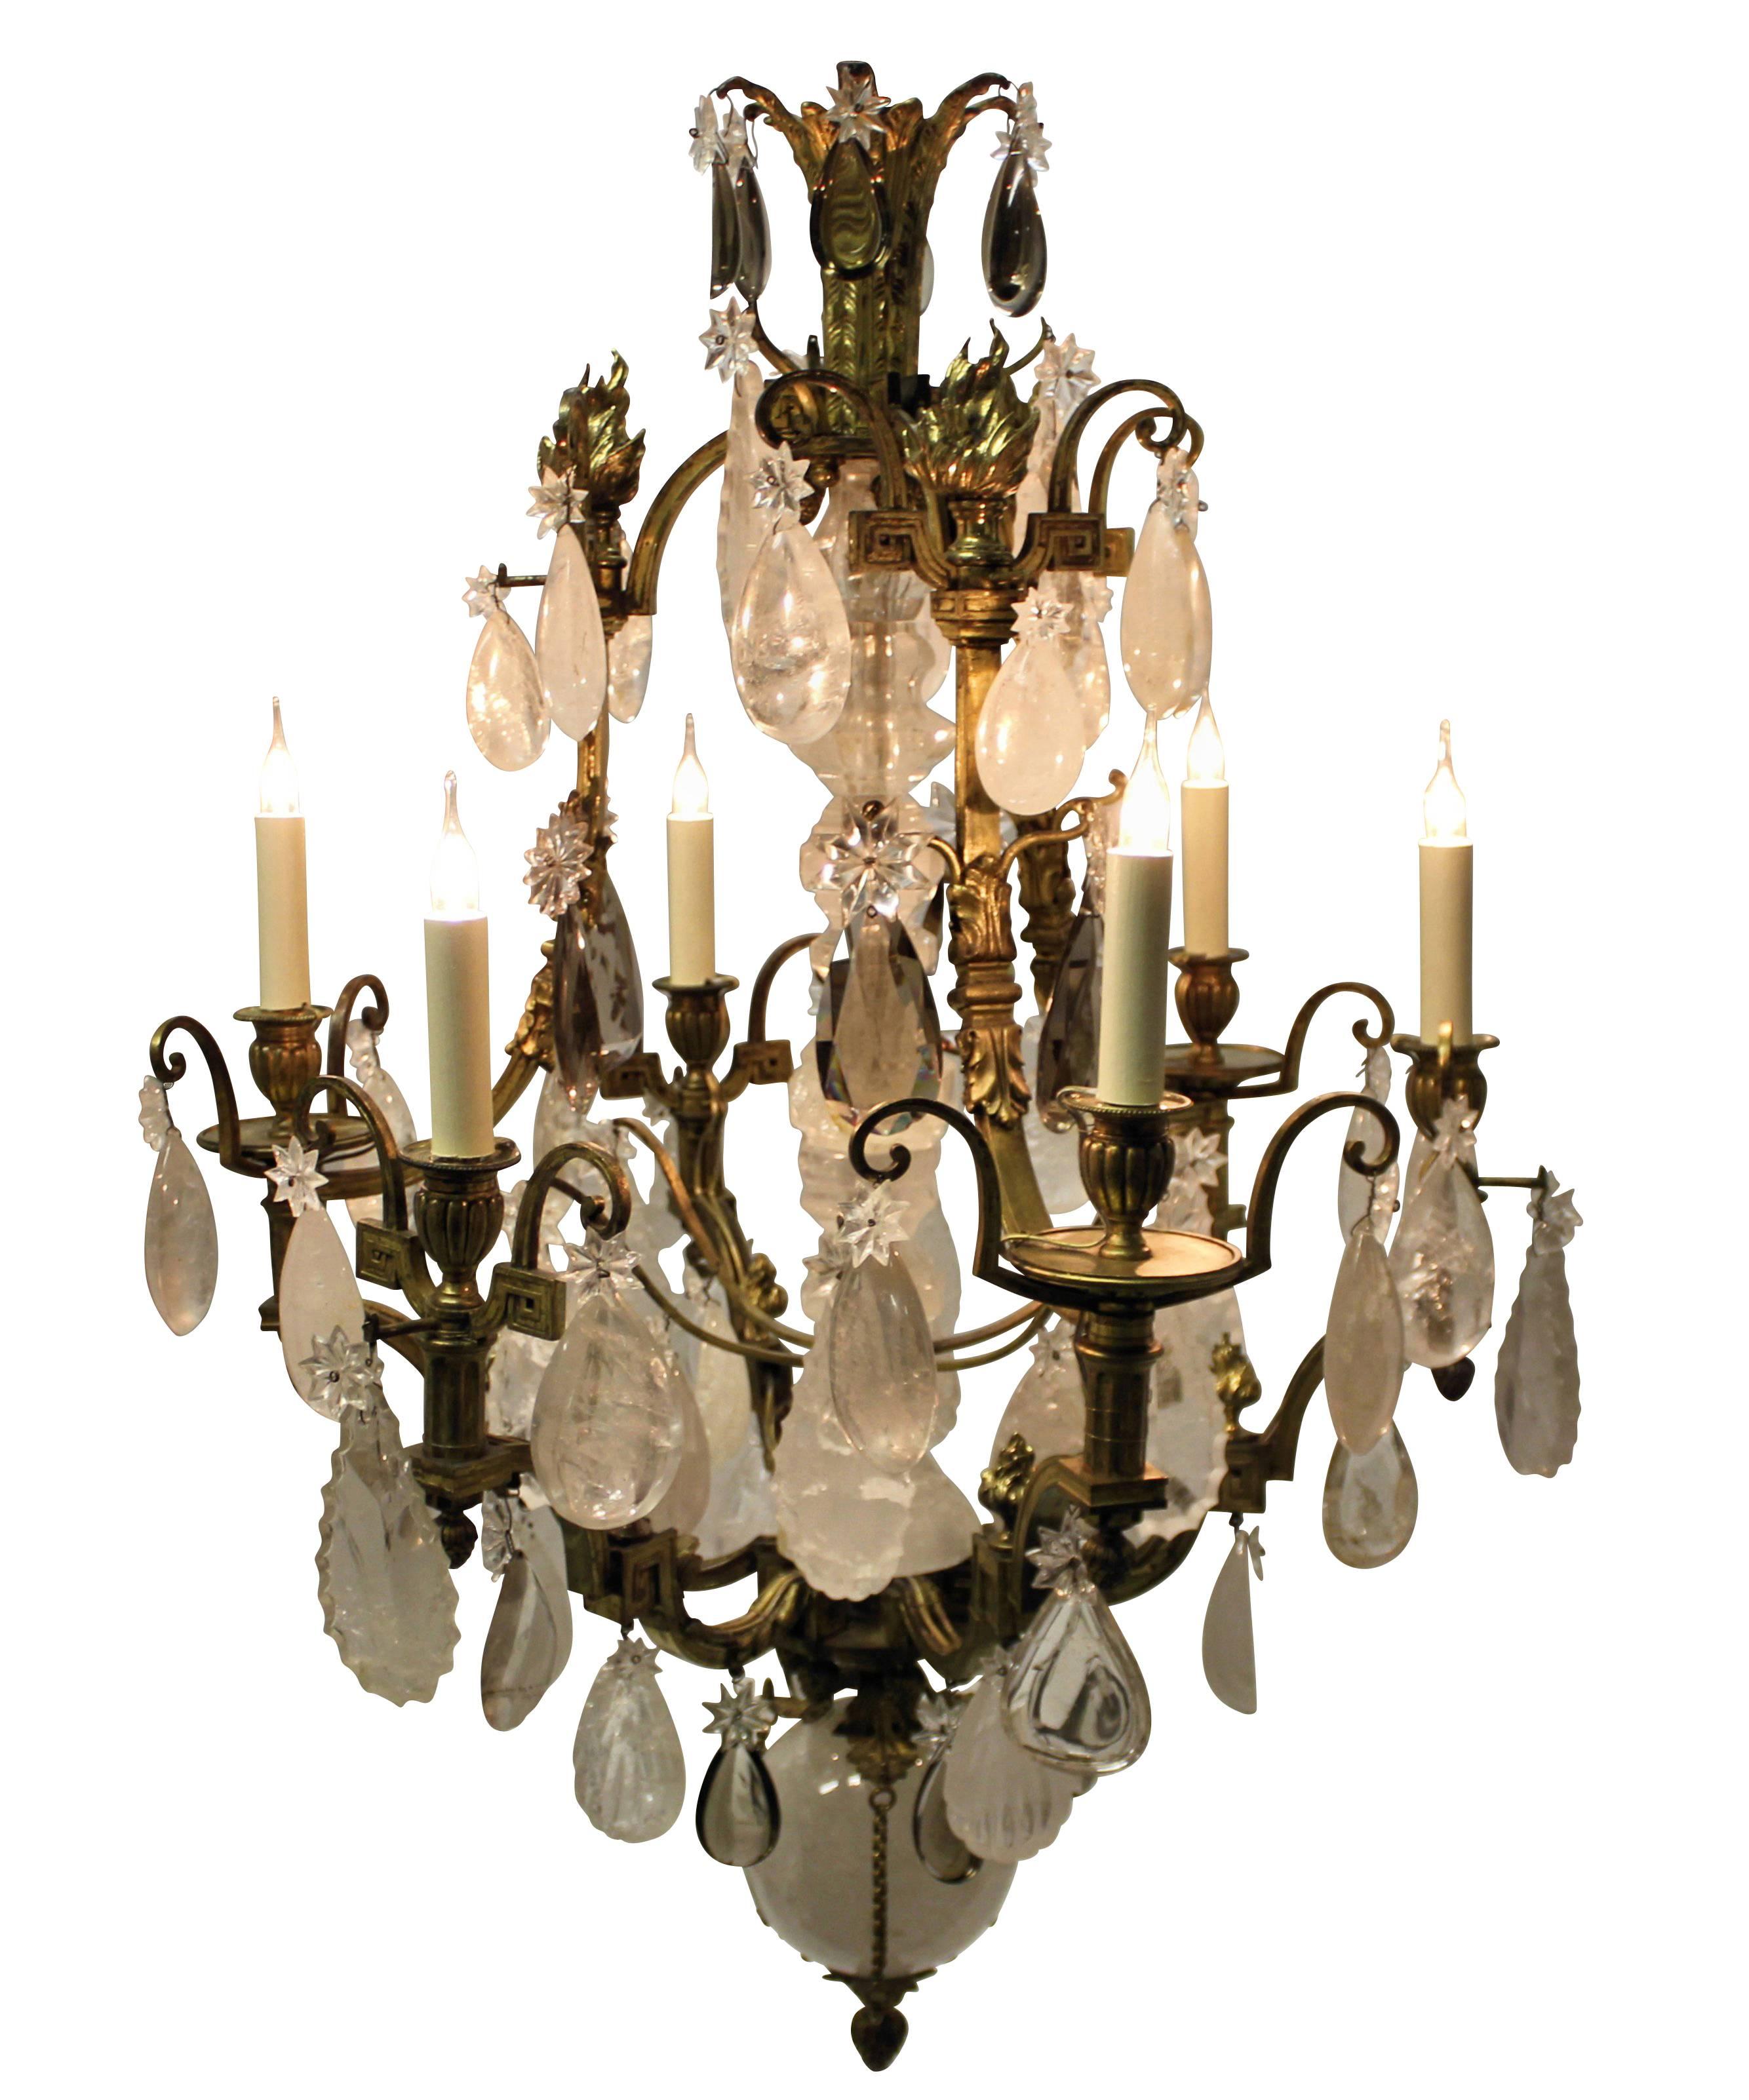 A fine Russian neoclassical gilt bronze and crystal De Roche chandelier with smoked quartz. Made in Paris for Saint Petersburg.

Measures: The ball has a diameter of 18cm and the largest plaque is 18 cm.